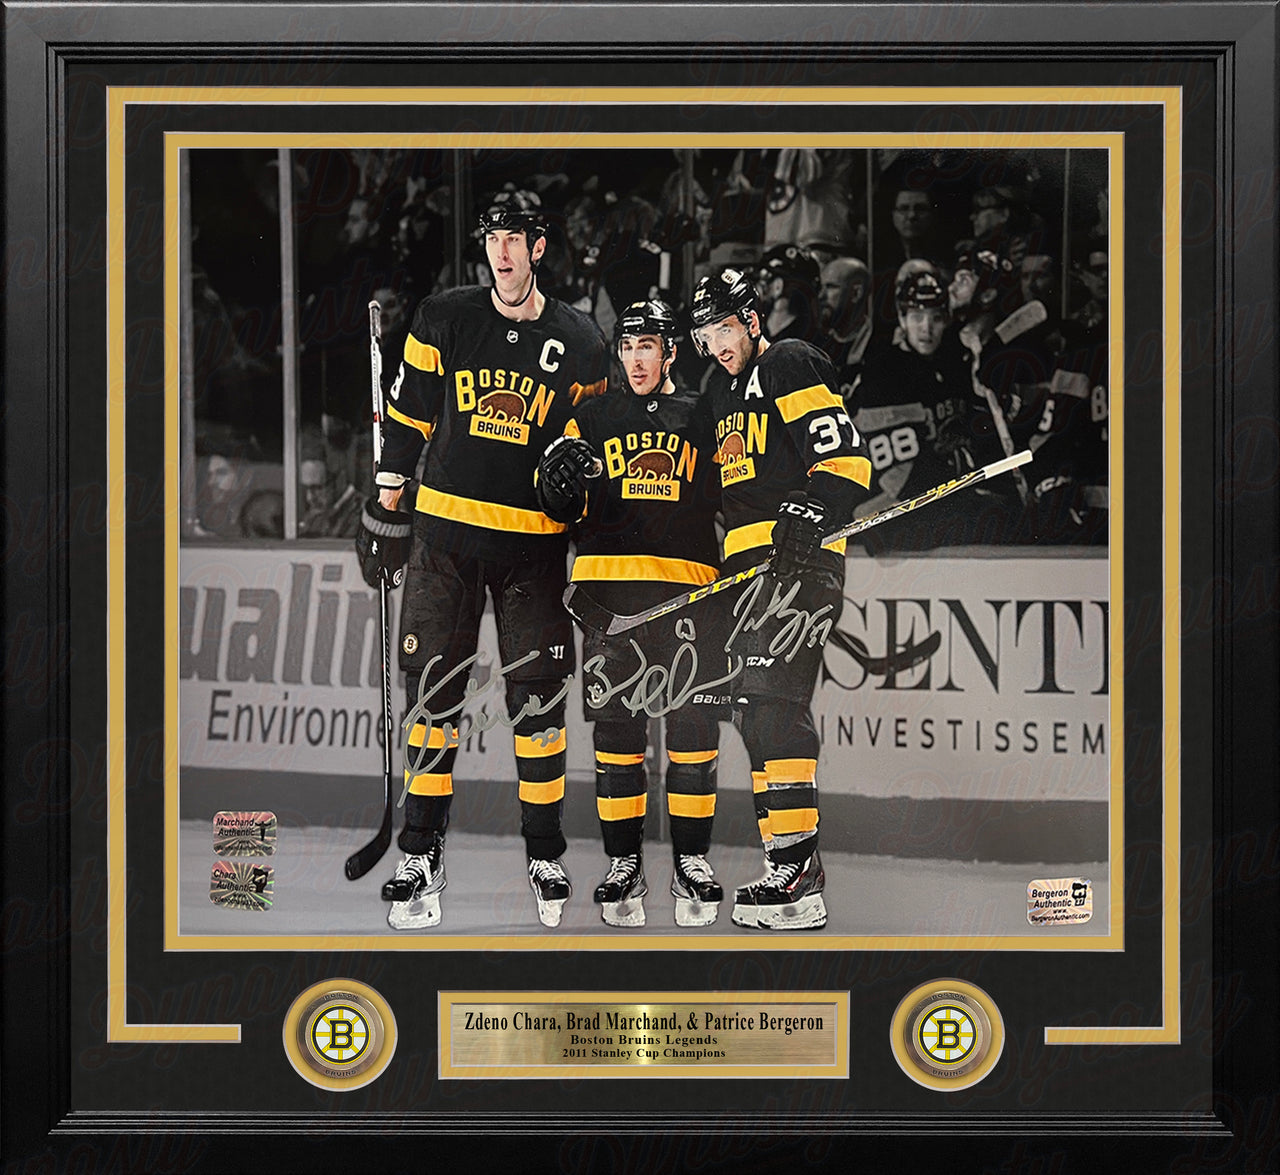 Charlie Mcavoy Boston Bruins Autographed 16 x 20 Lake Tahoe Photograph